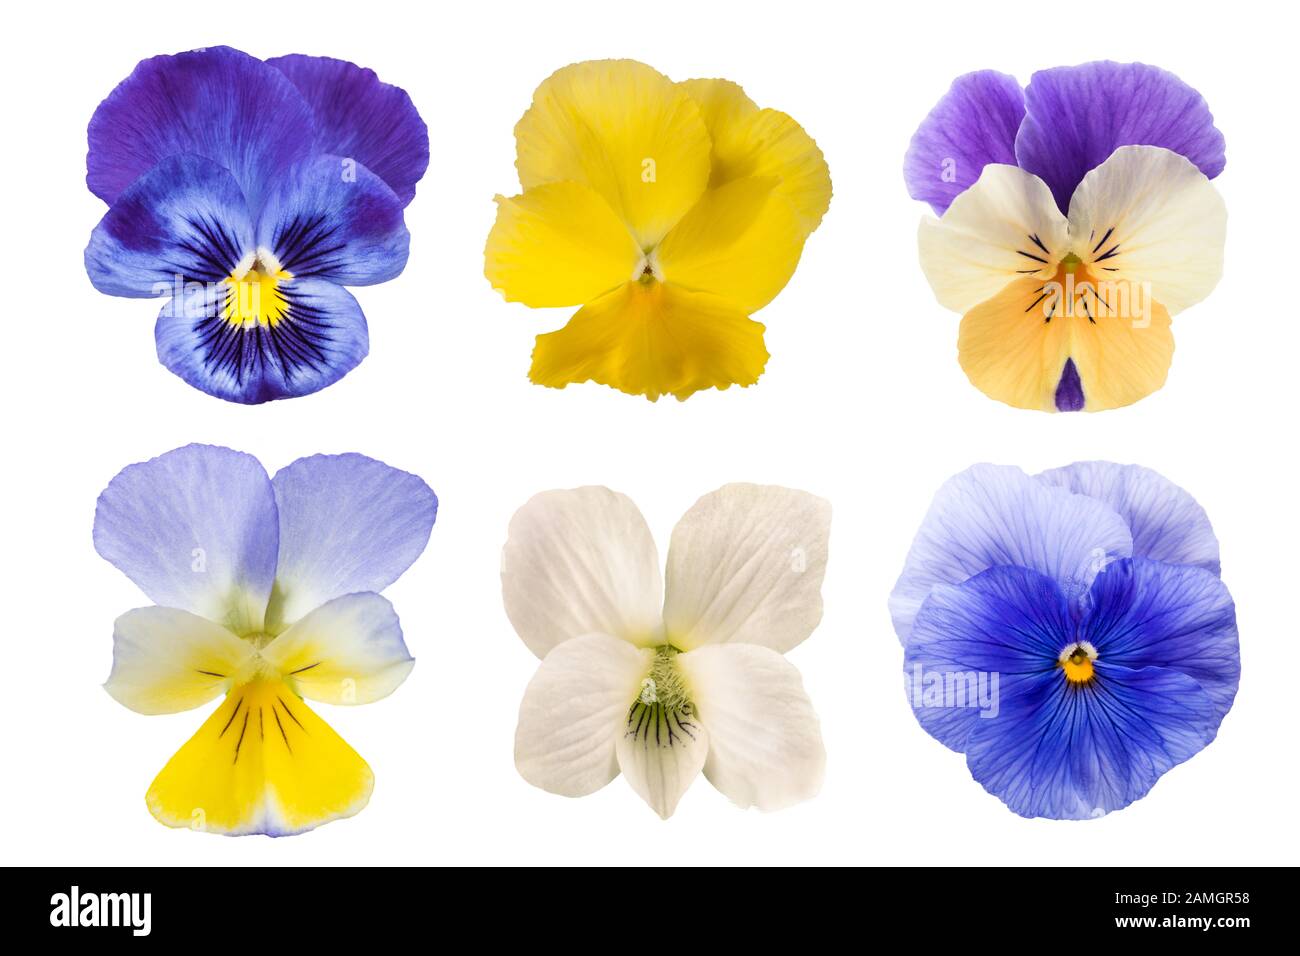 Pansy flowers mix isolated on white background Stock Photo